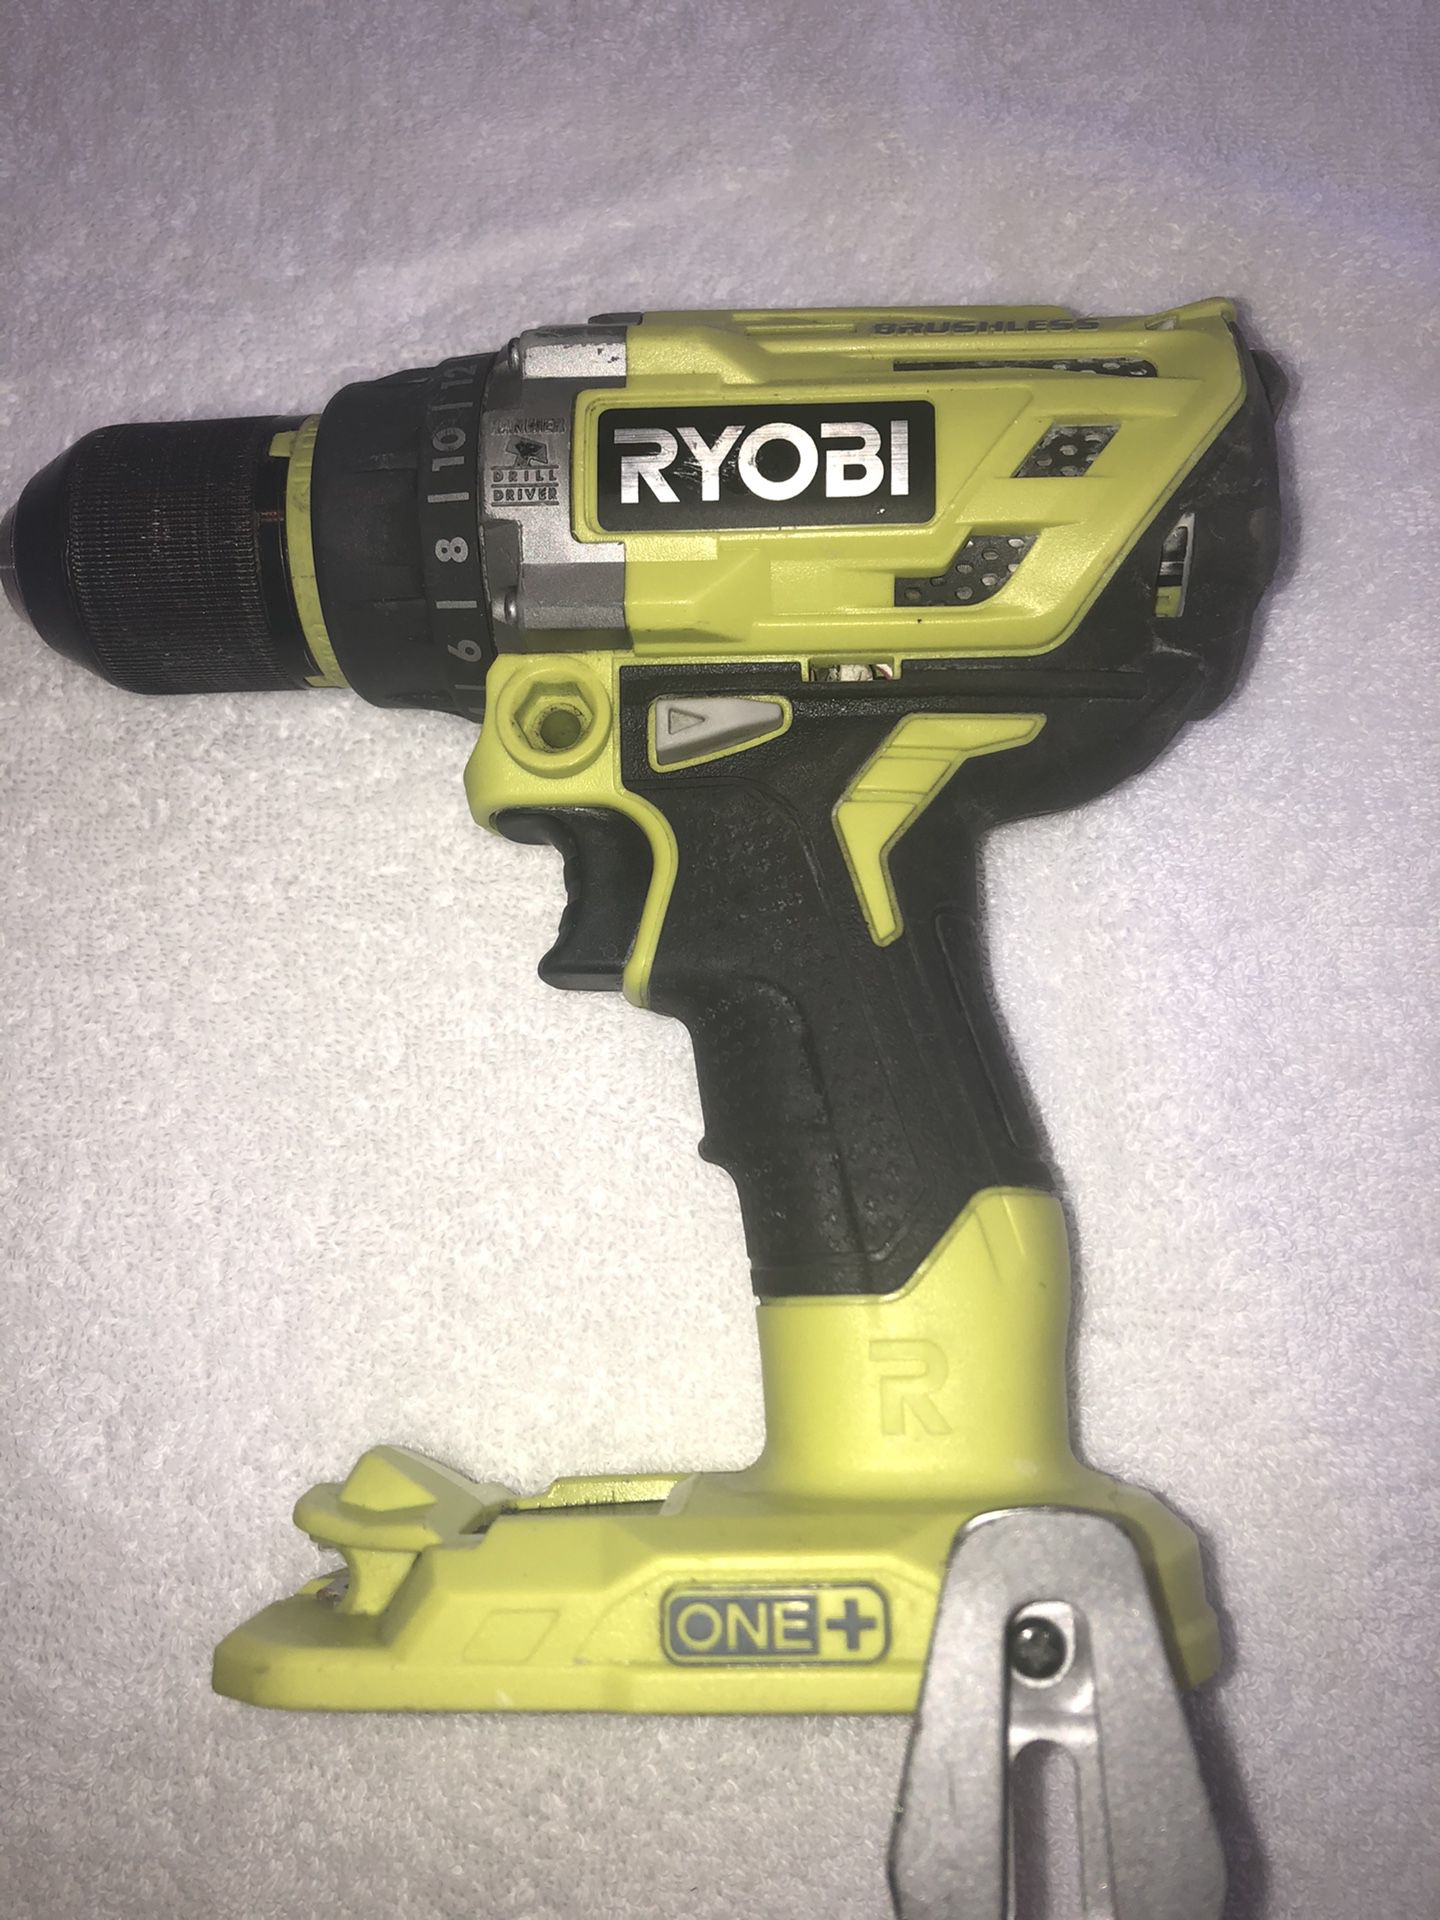 RYOBI 18-Volt ONE+ Lithium-Ion Cordless Brushless 1/2 in. Hammer Drill/Driver